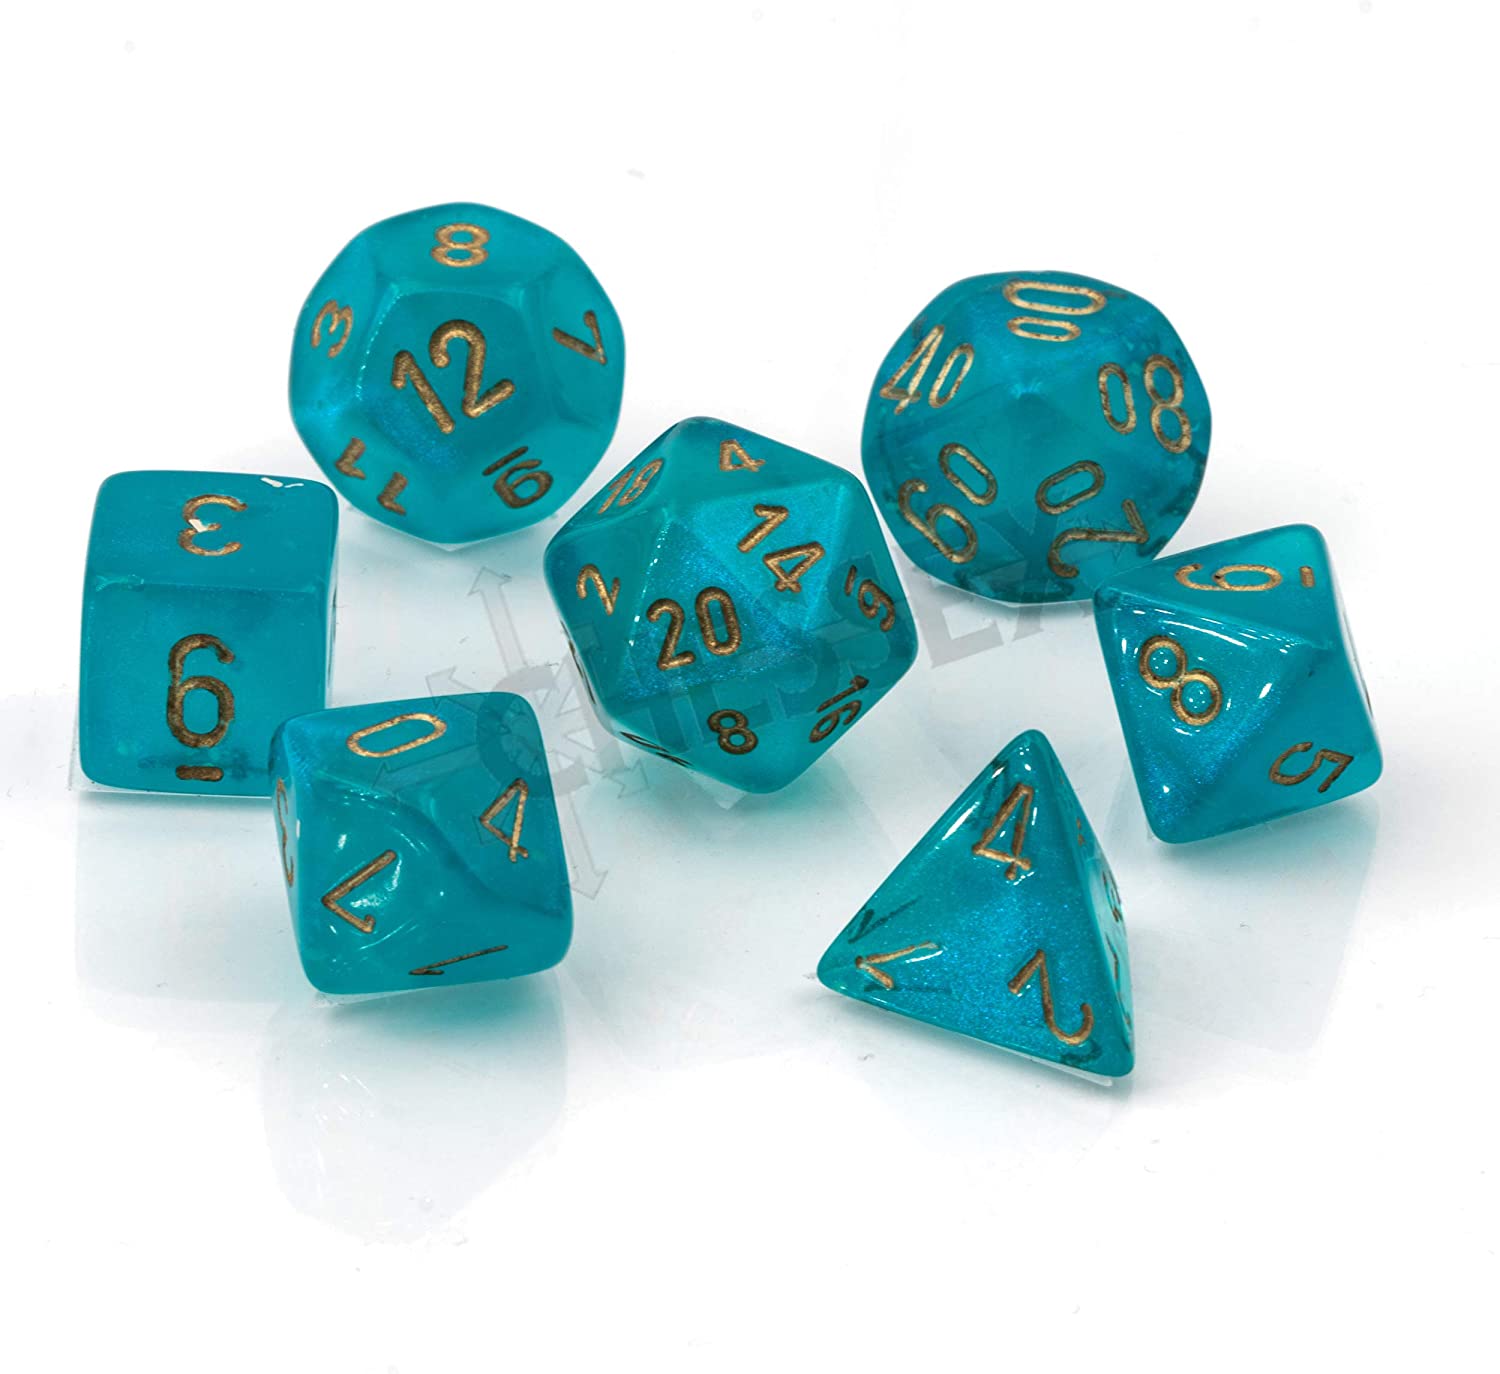 Chessex Polyhedral 7-Die Set - Borealis Teal/Gold with Luminary 27585 | CCGPrime